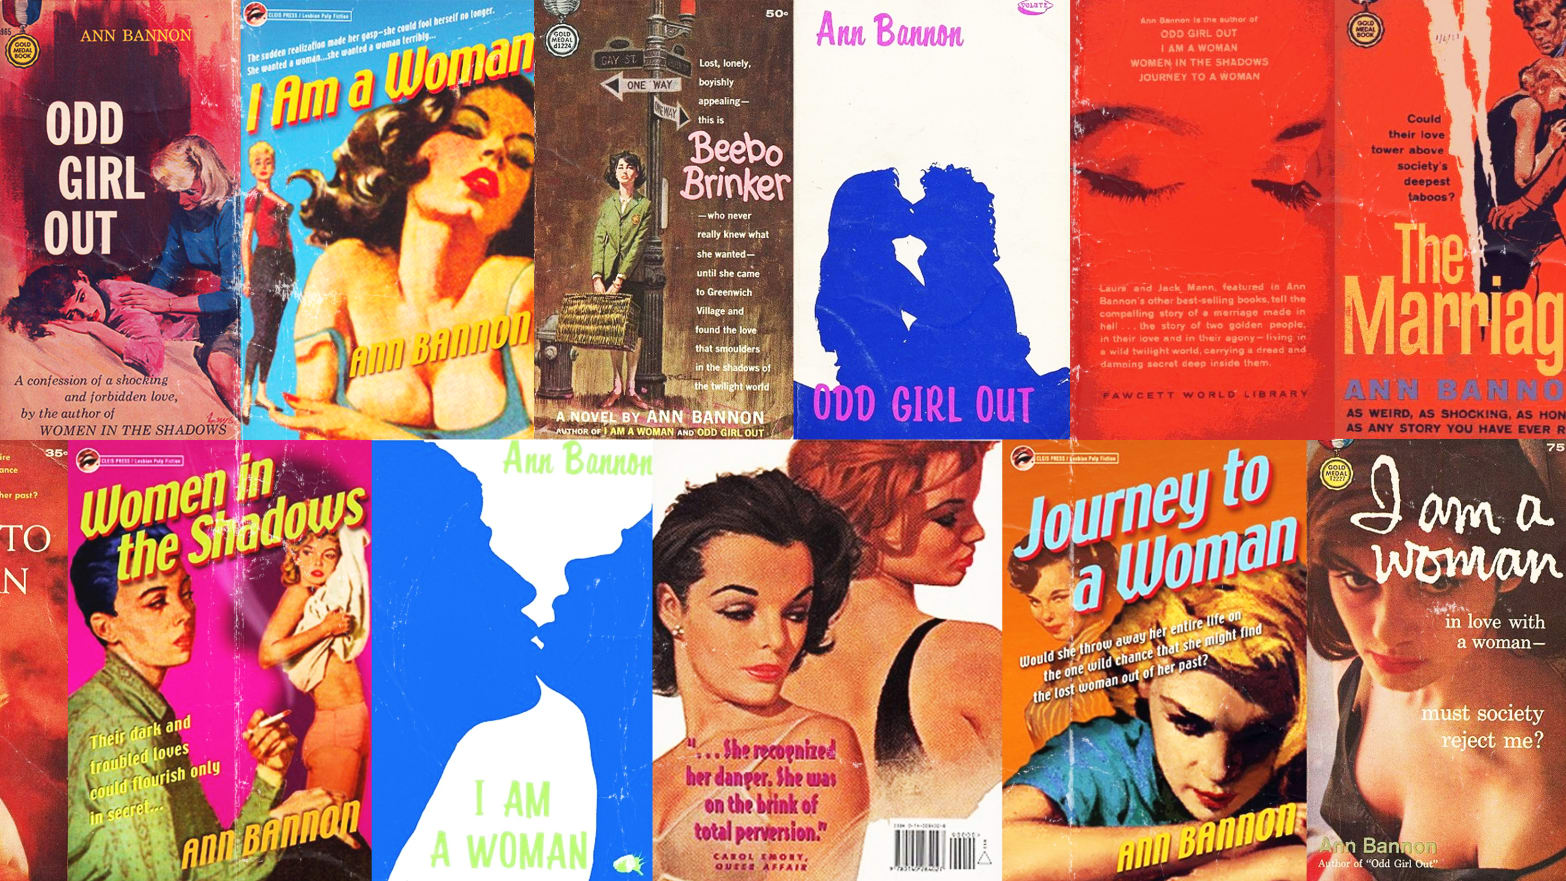 Ann Bannon, the Queen of Lesbian Pulp Fiction, Reveals Her Own Amazing Story photo photo